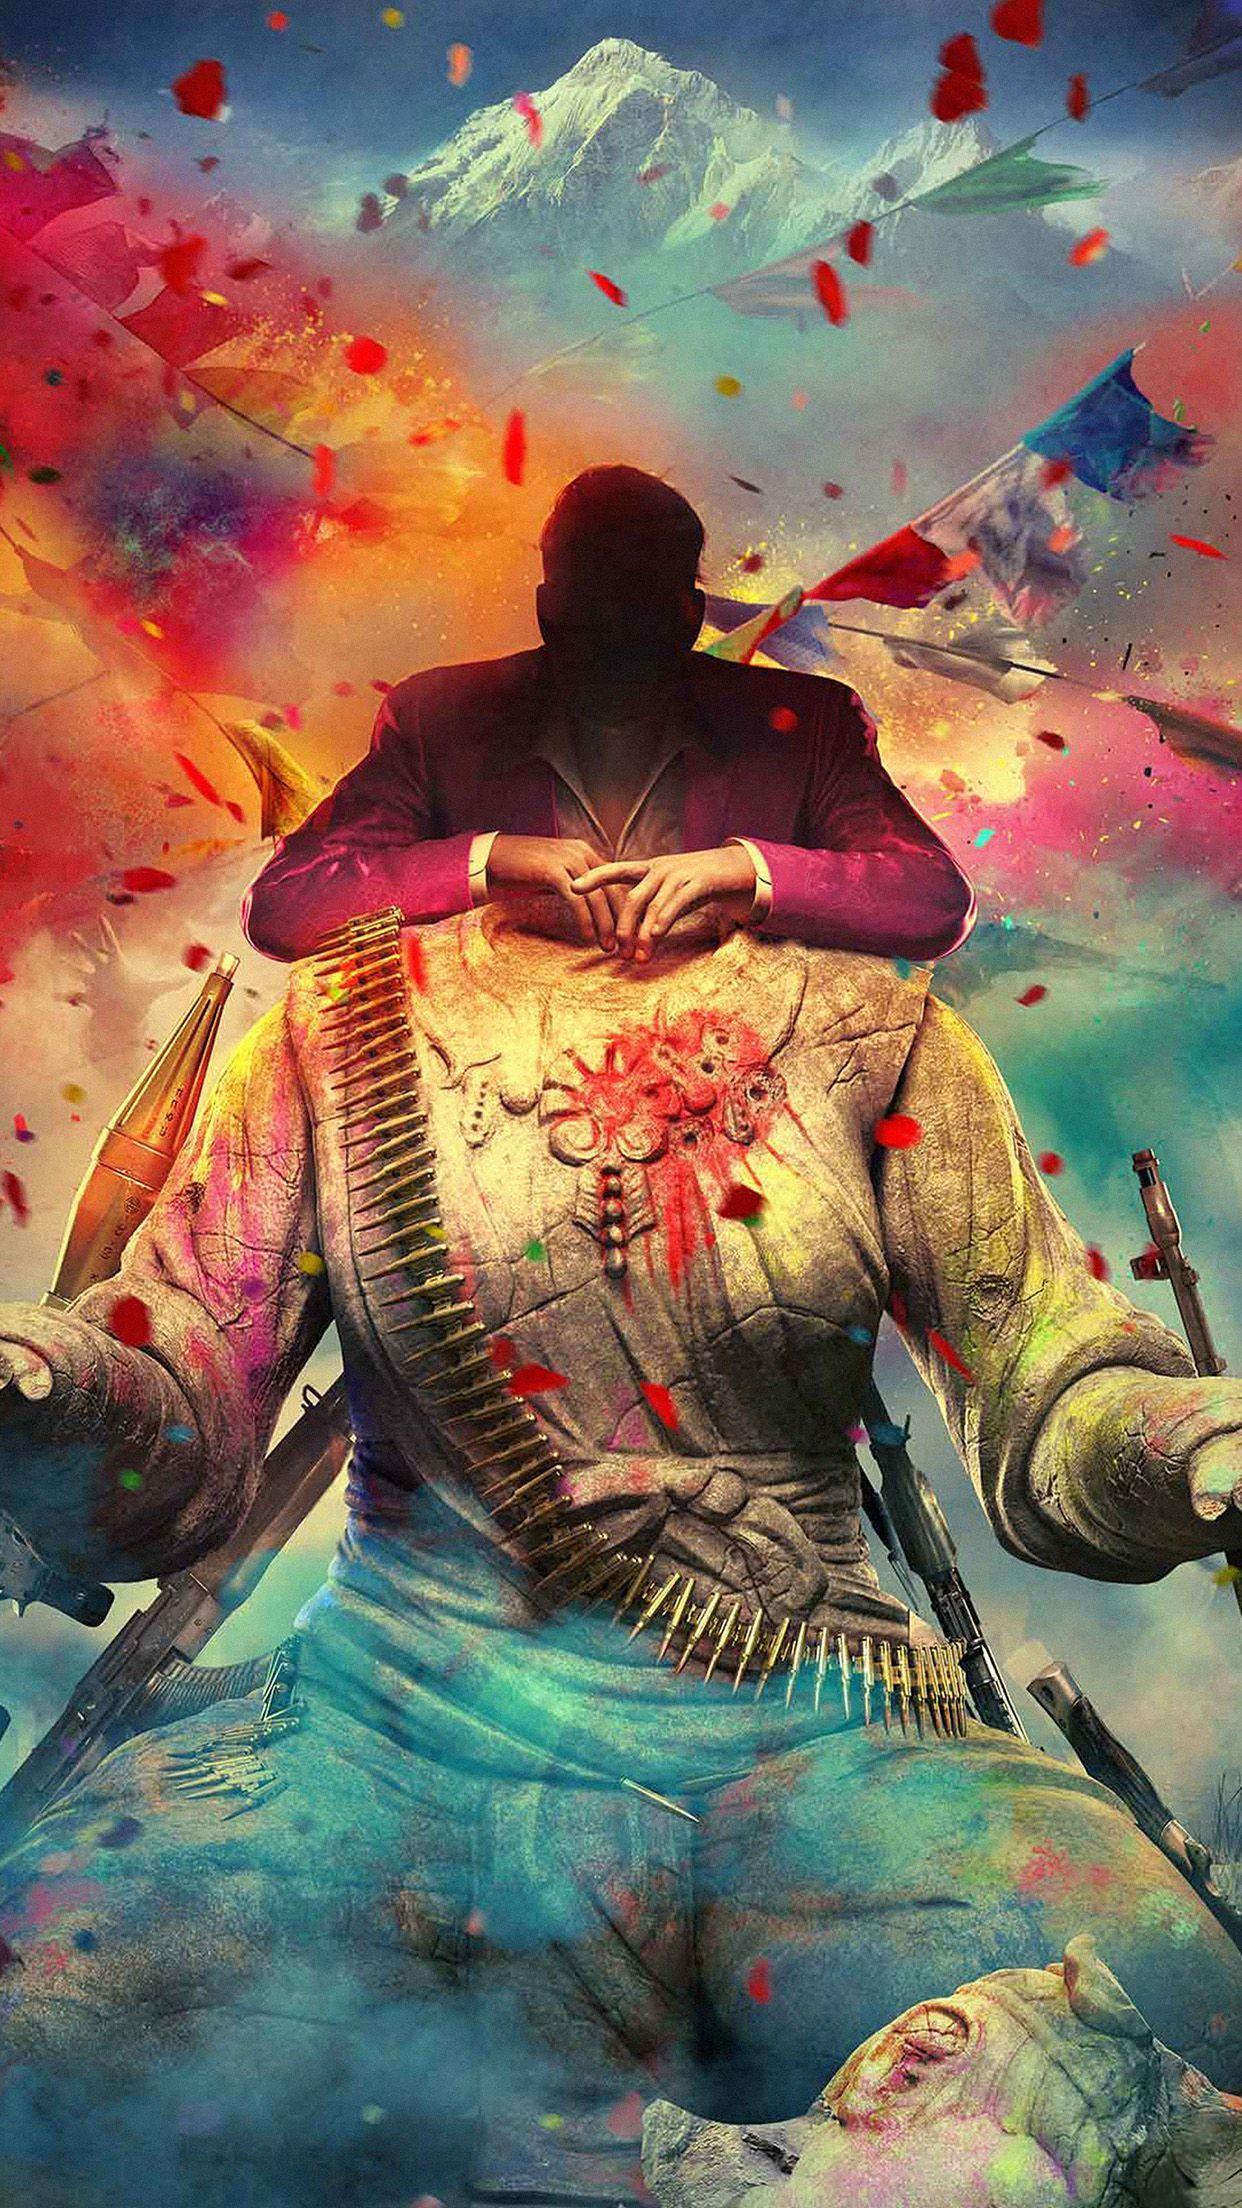 Far Cry 4 Game Digital Art Android Wallpaper. <3 Stories